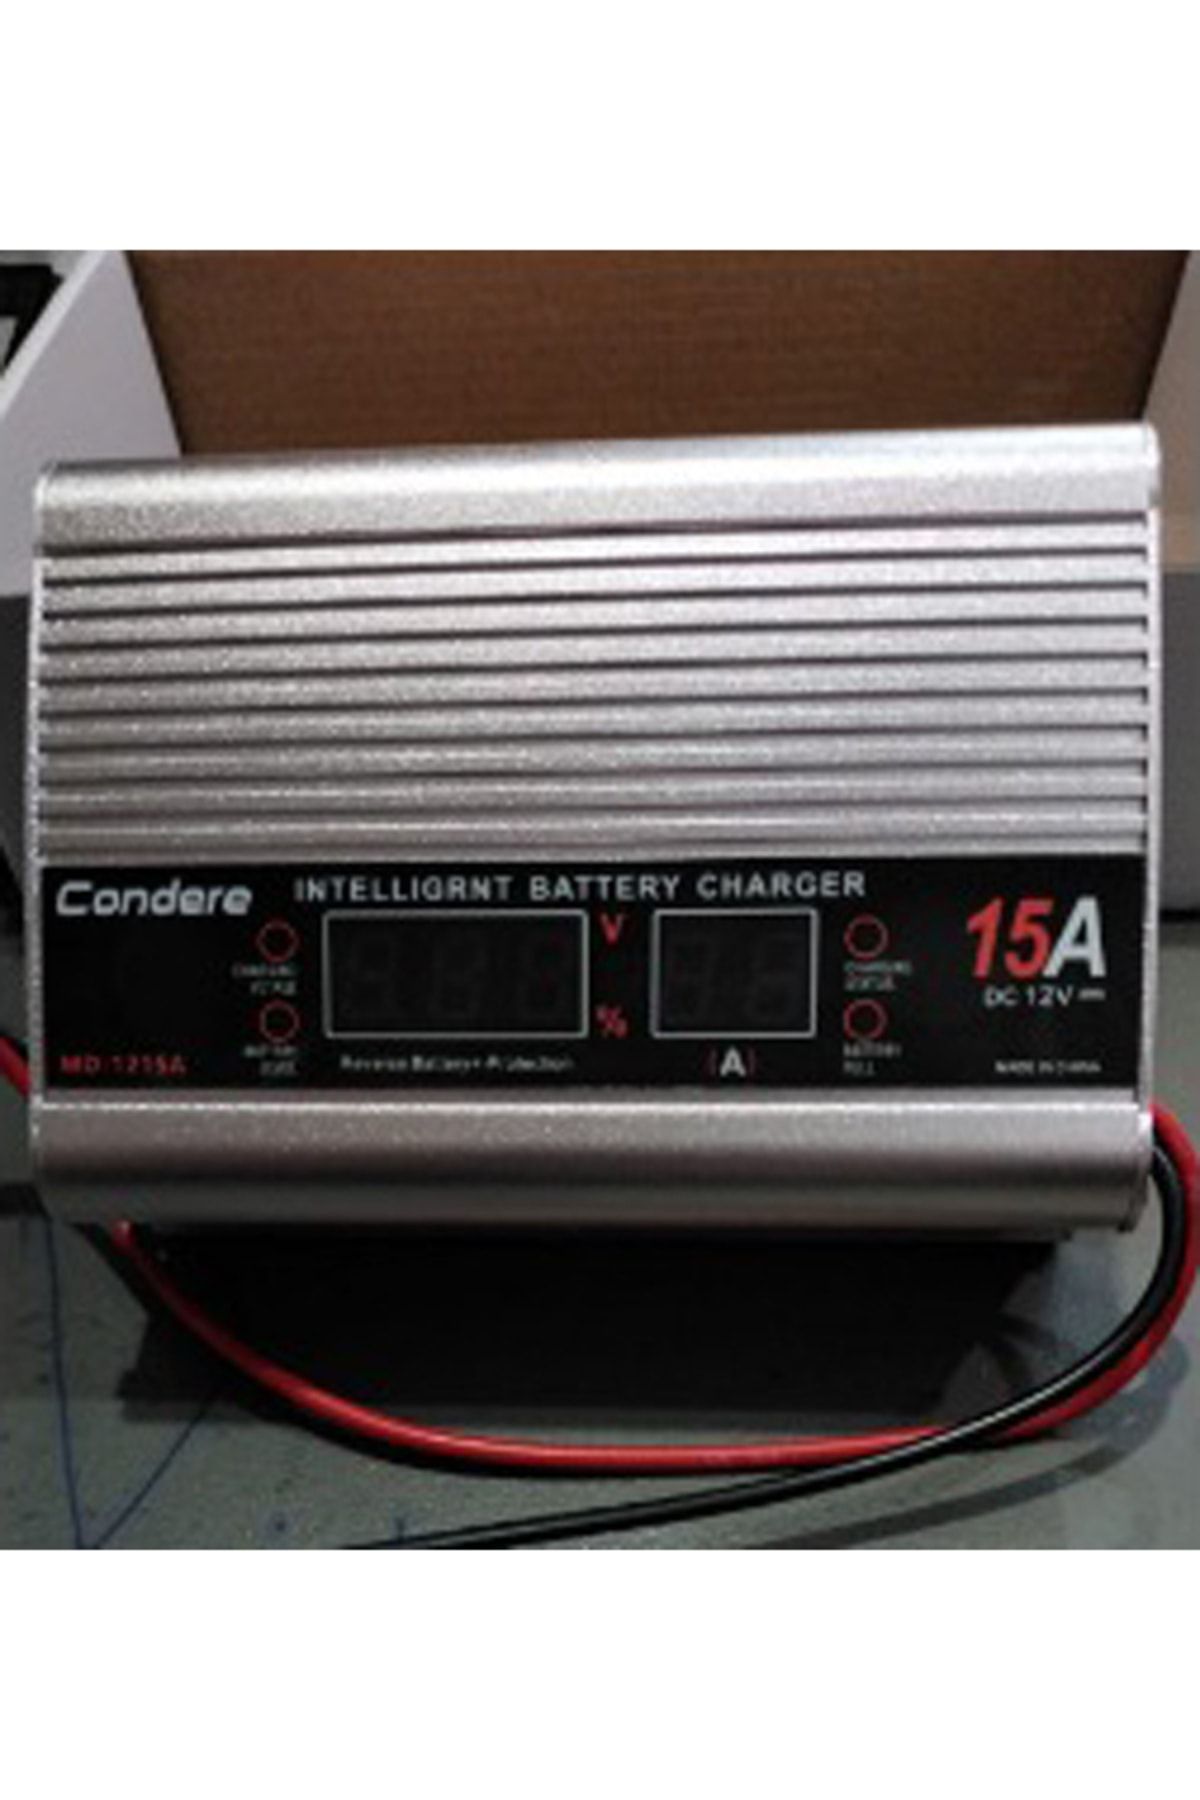 Condere Intellıgrnt Battery Charger Md-1215a